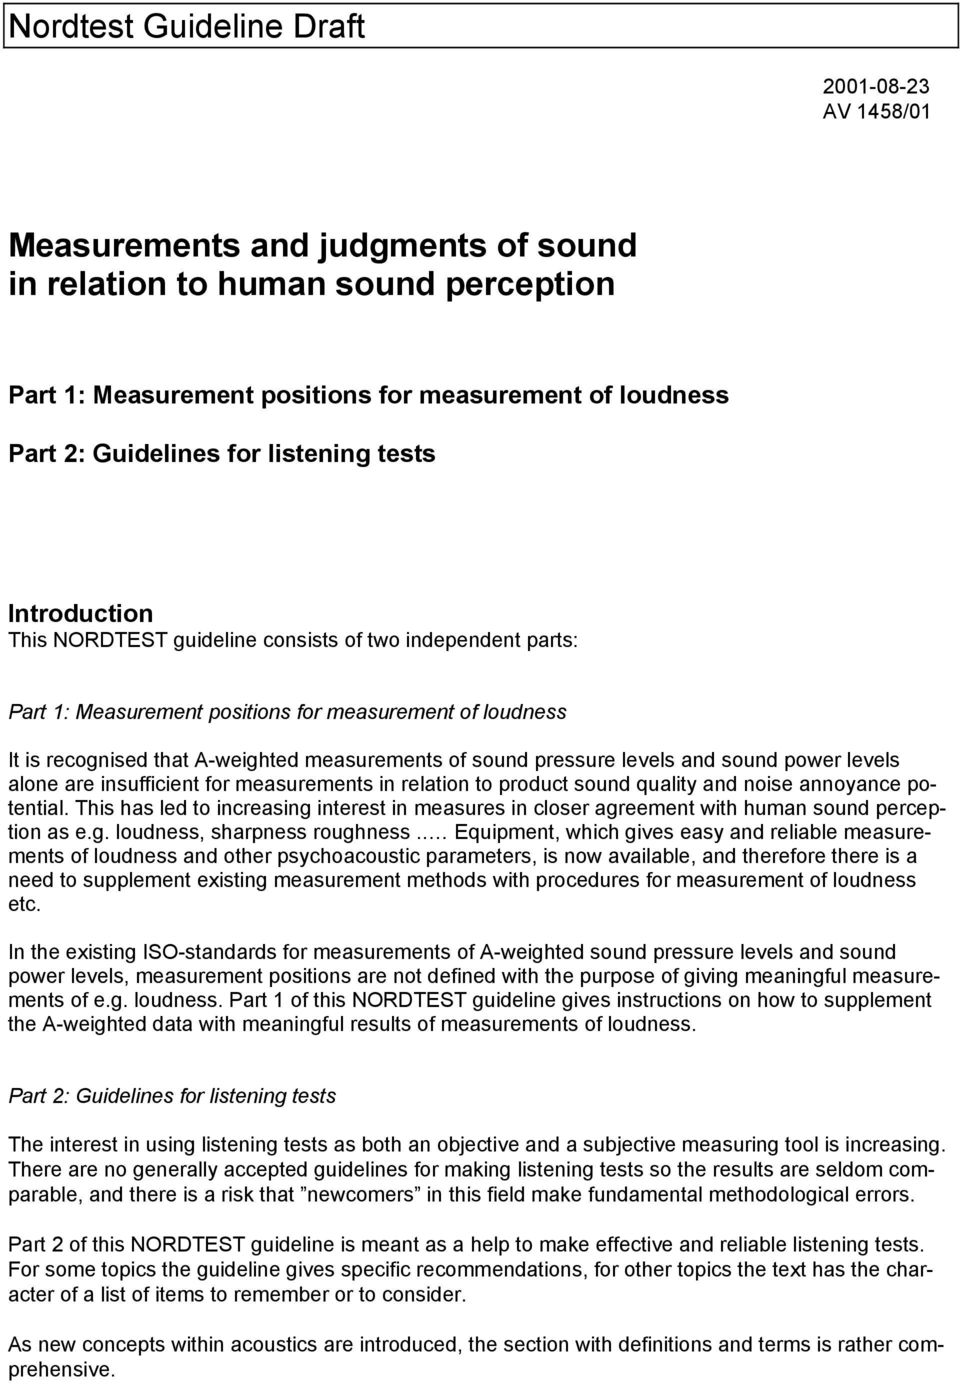 sound pressure levels and sound power levels alone are insufficient for measurements in relation to product sound quality and noise annoyance potential.